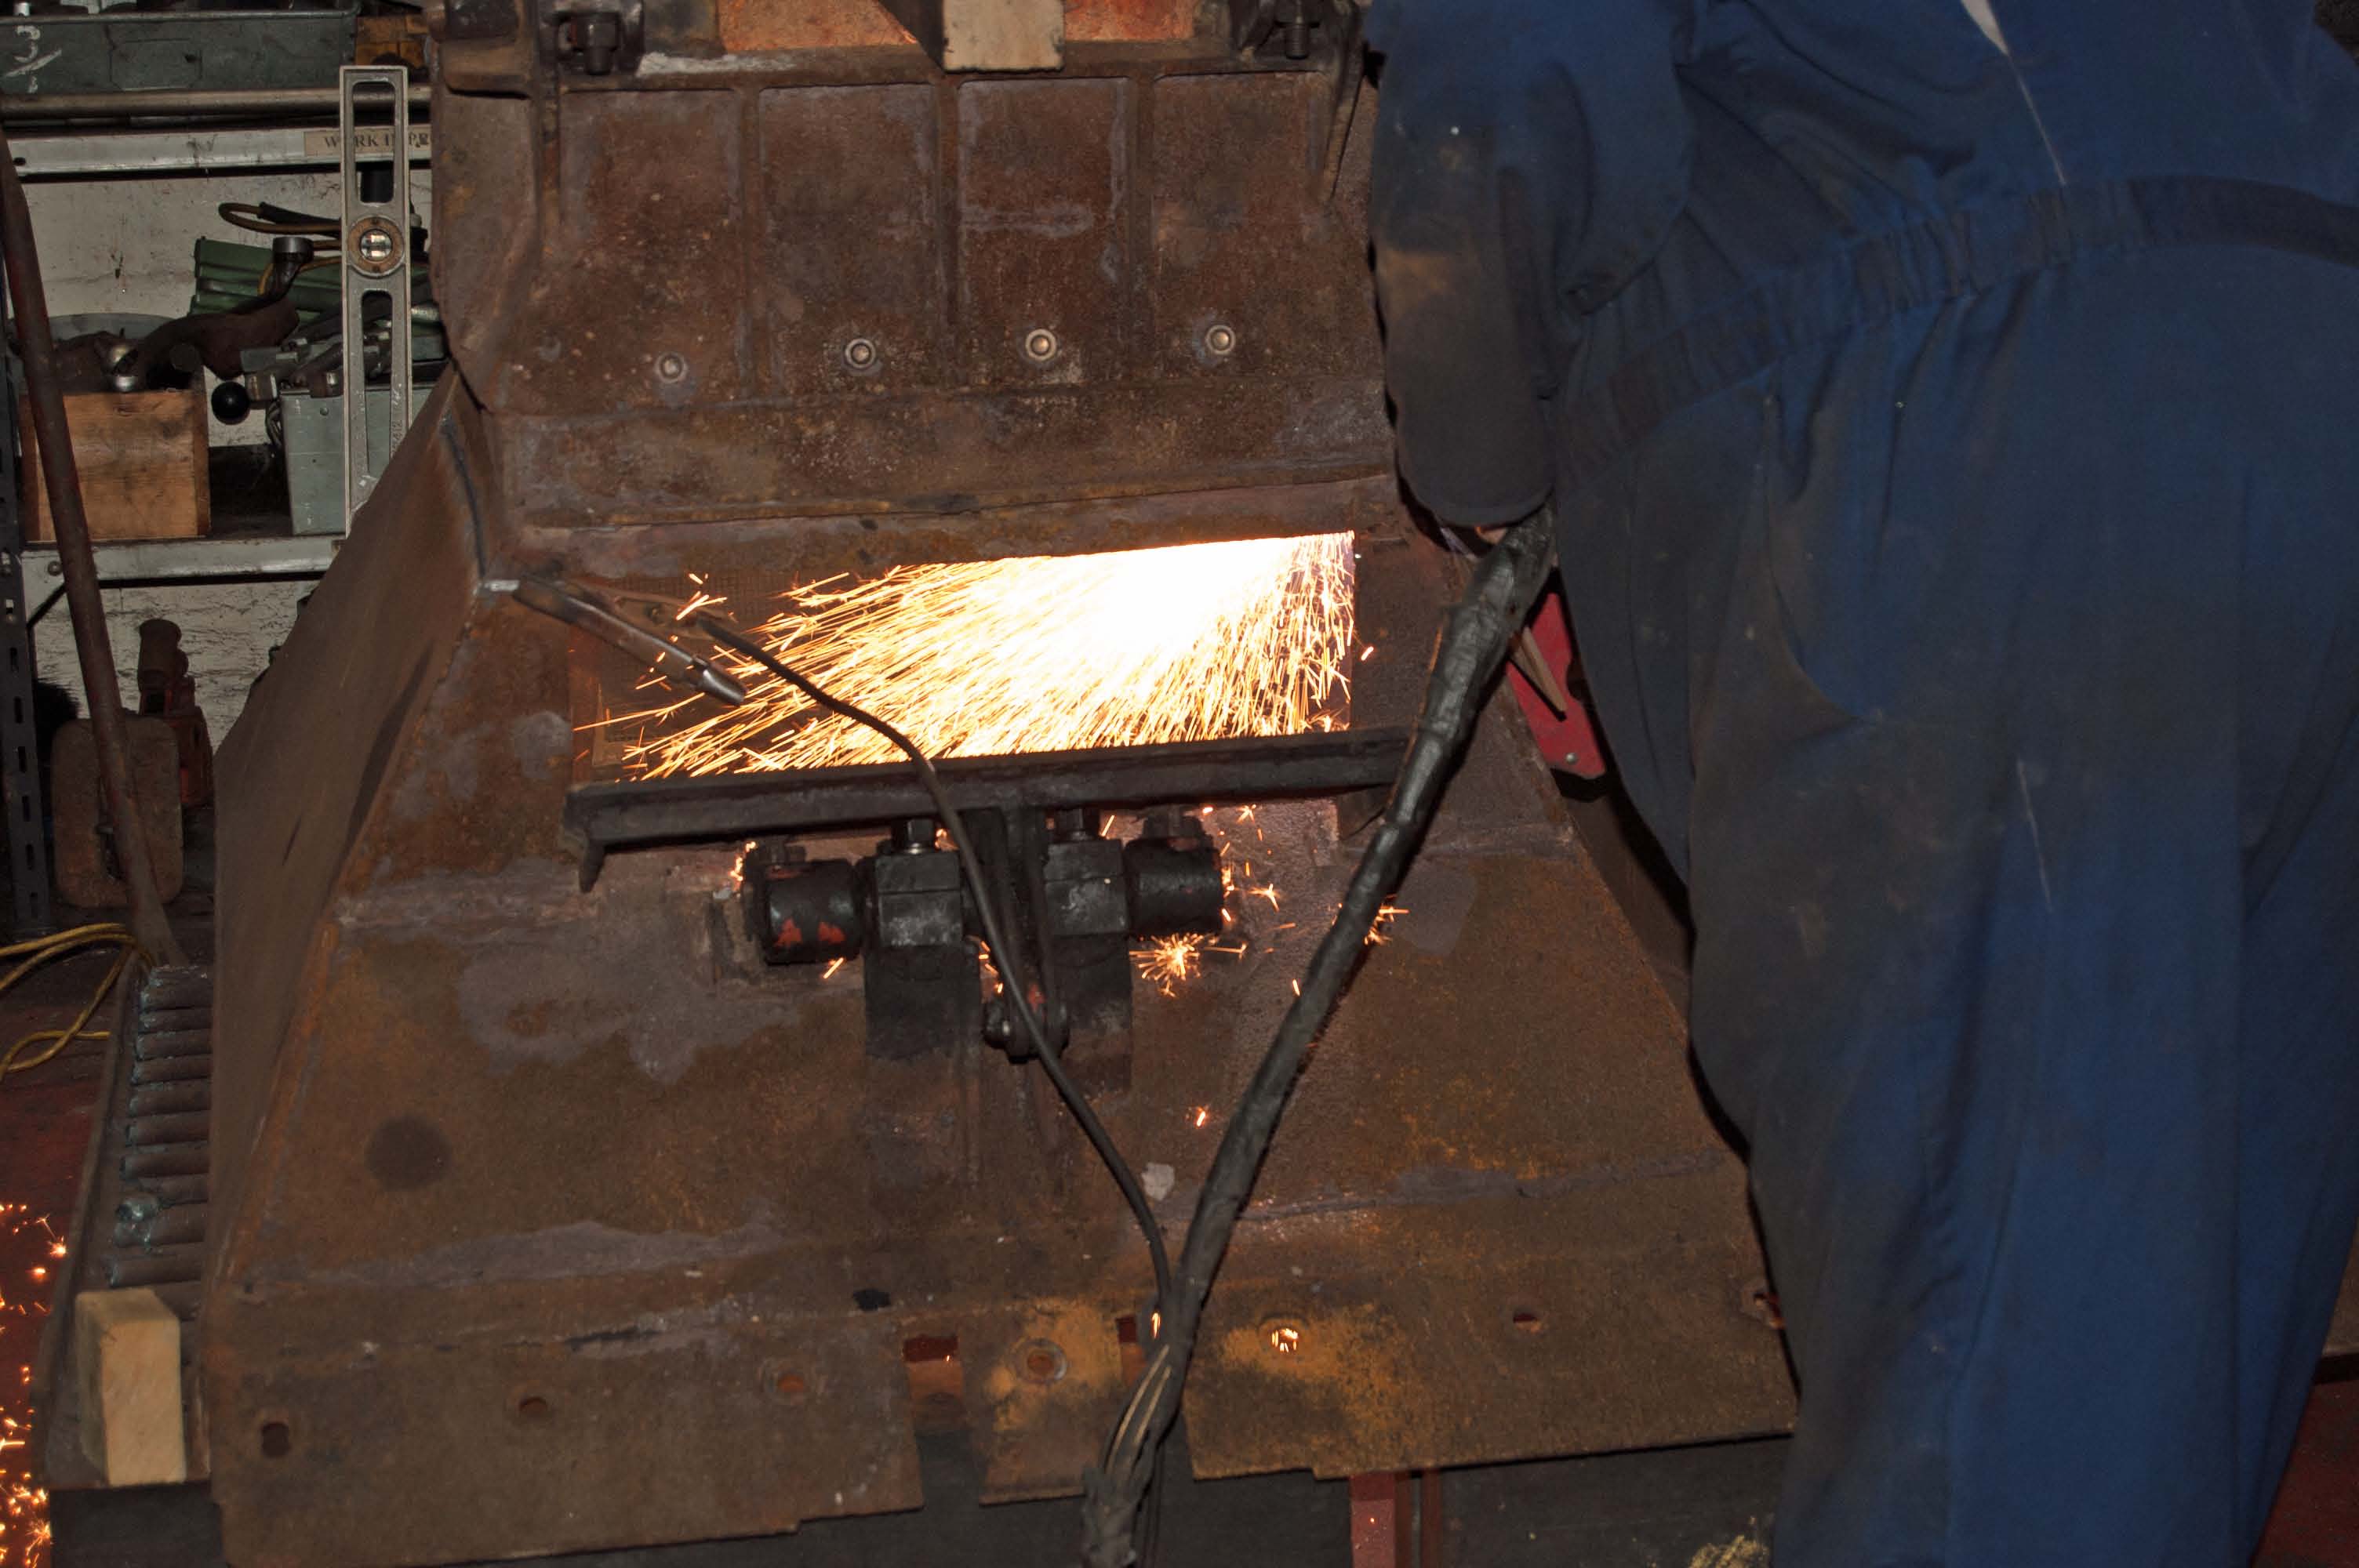 The plasma cutter is being used to remove damaged parts of the ashpans, so that they can be replaced or repaired.